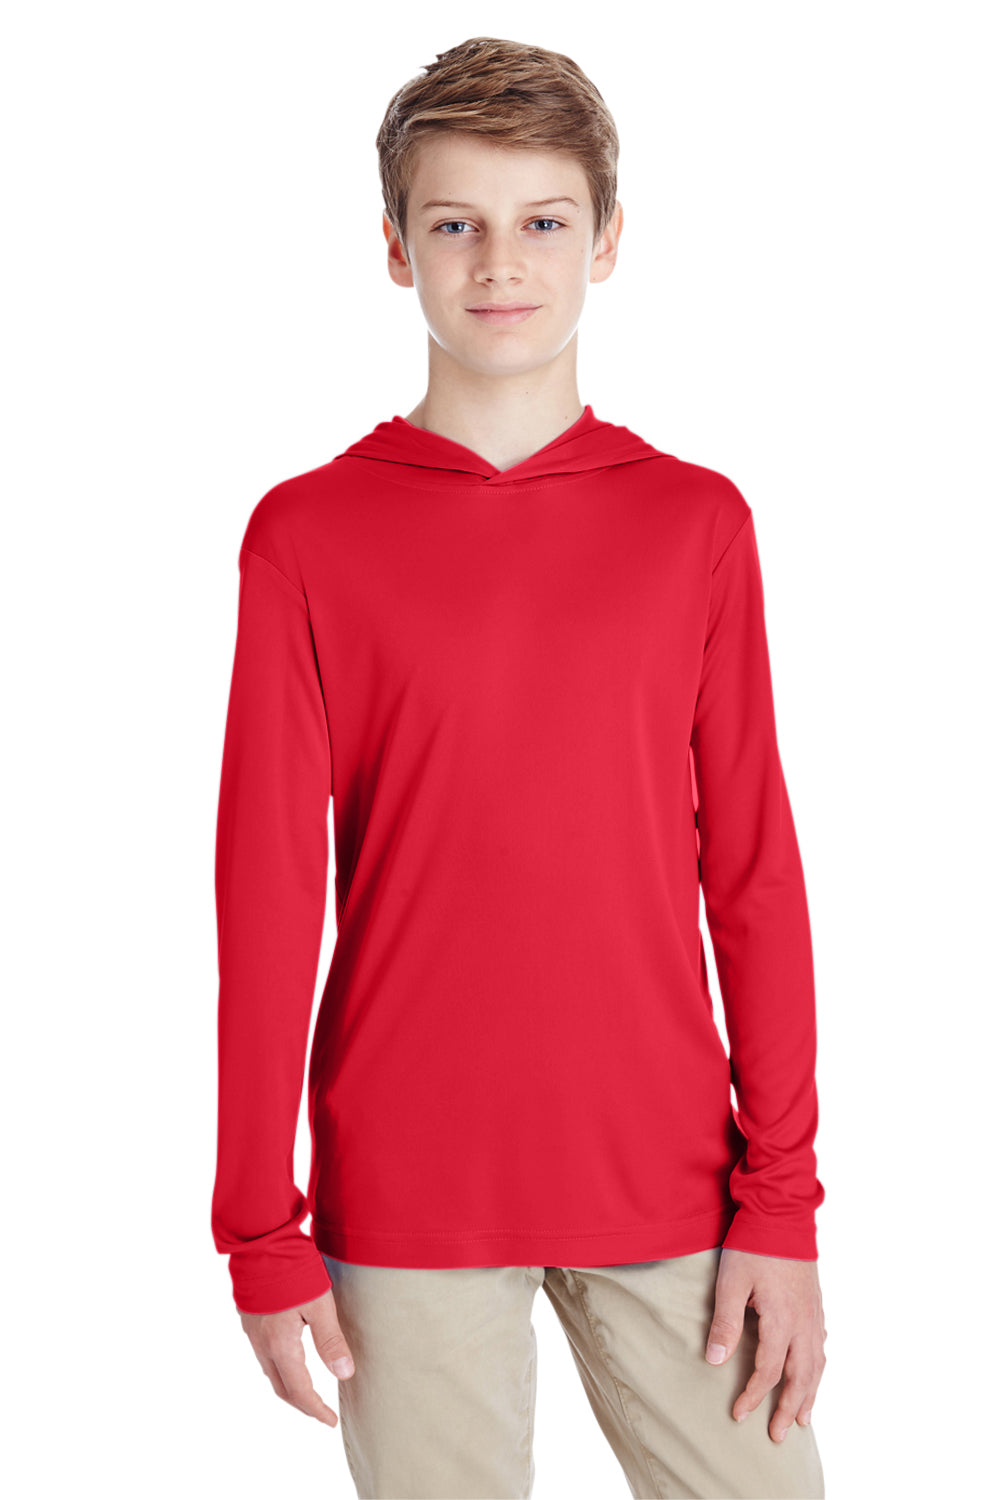 Team 365 TT41Y Youth Zone Performance Moisture Wicking Long Sleeve Hooded T-Shirt Hoodie Red Front